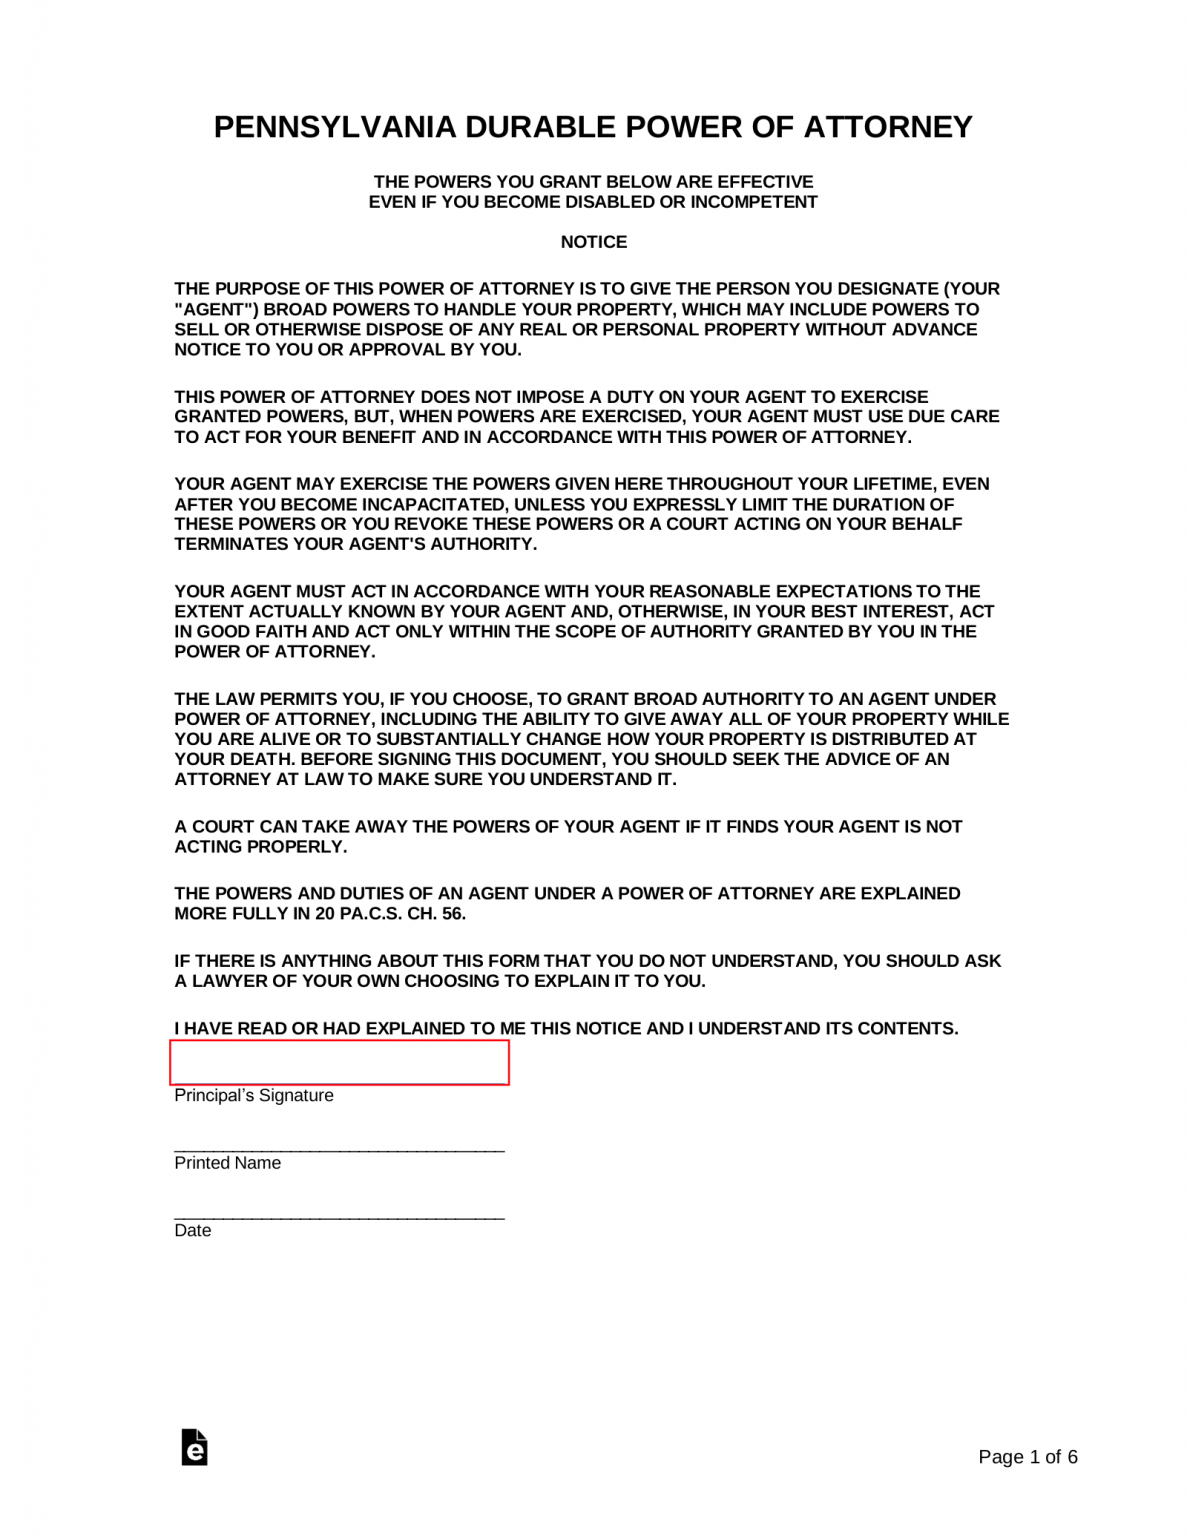 Durable Power Of Attorney Pa Printable Form Printable Forms Free Online